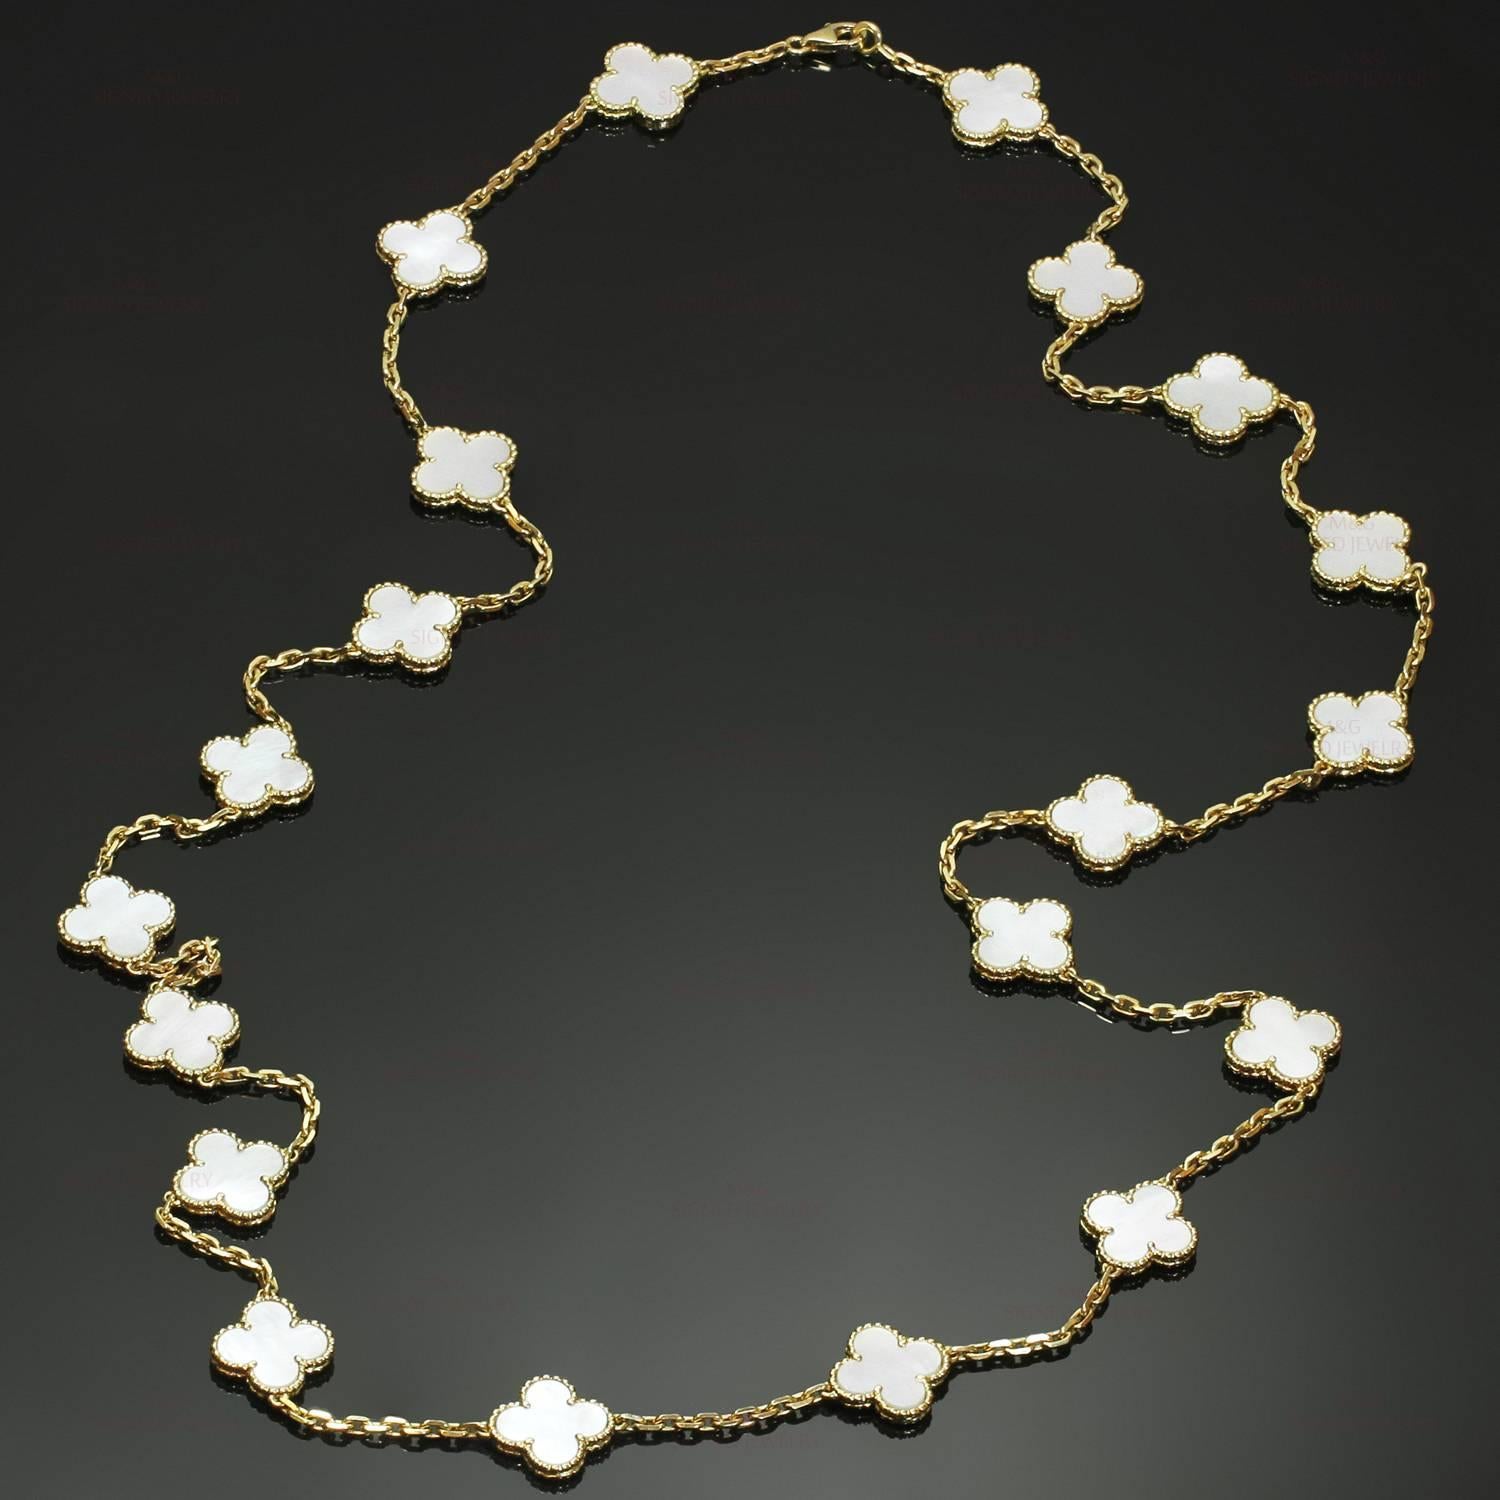 This classic Van Cleef & Arpels necklace is crafted in 18k yellow gold and features 20 lucky clover motifs beautifully inlaid with mother-of-pearl in round bead settings. Made in France circa 2000s. Measurements: 0.59" (15mm) width,